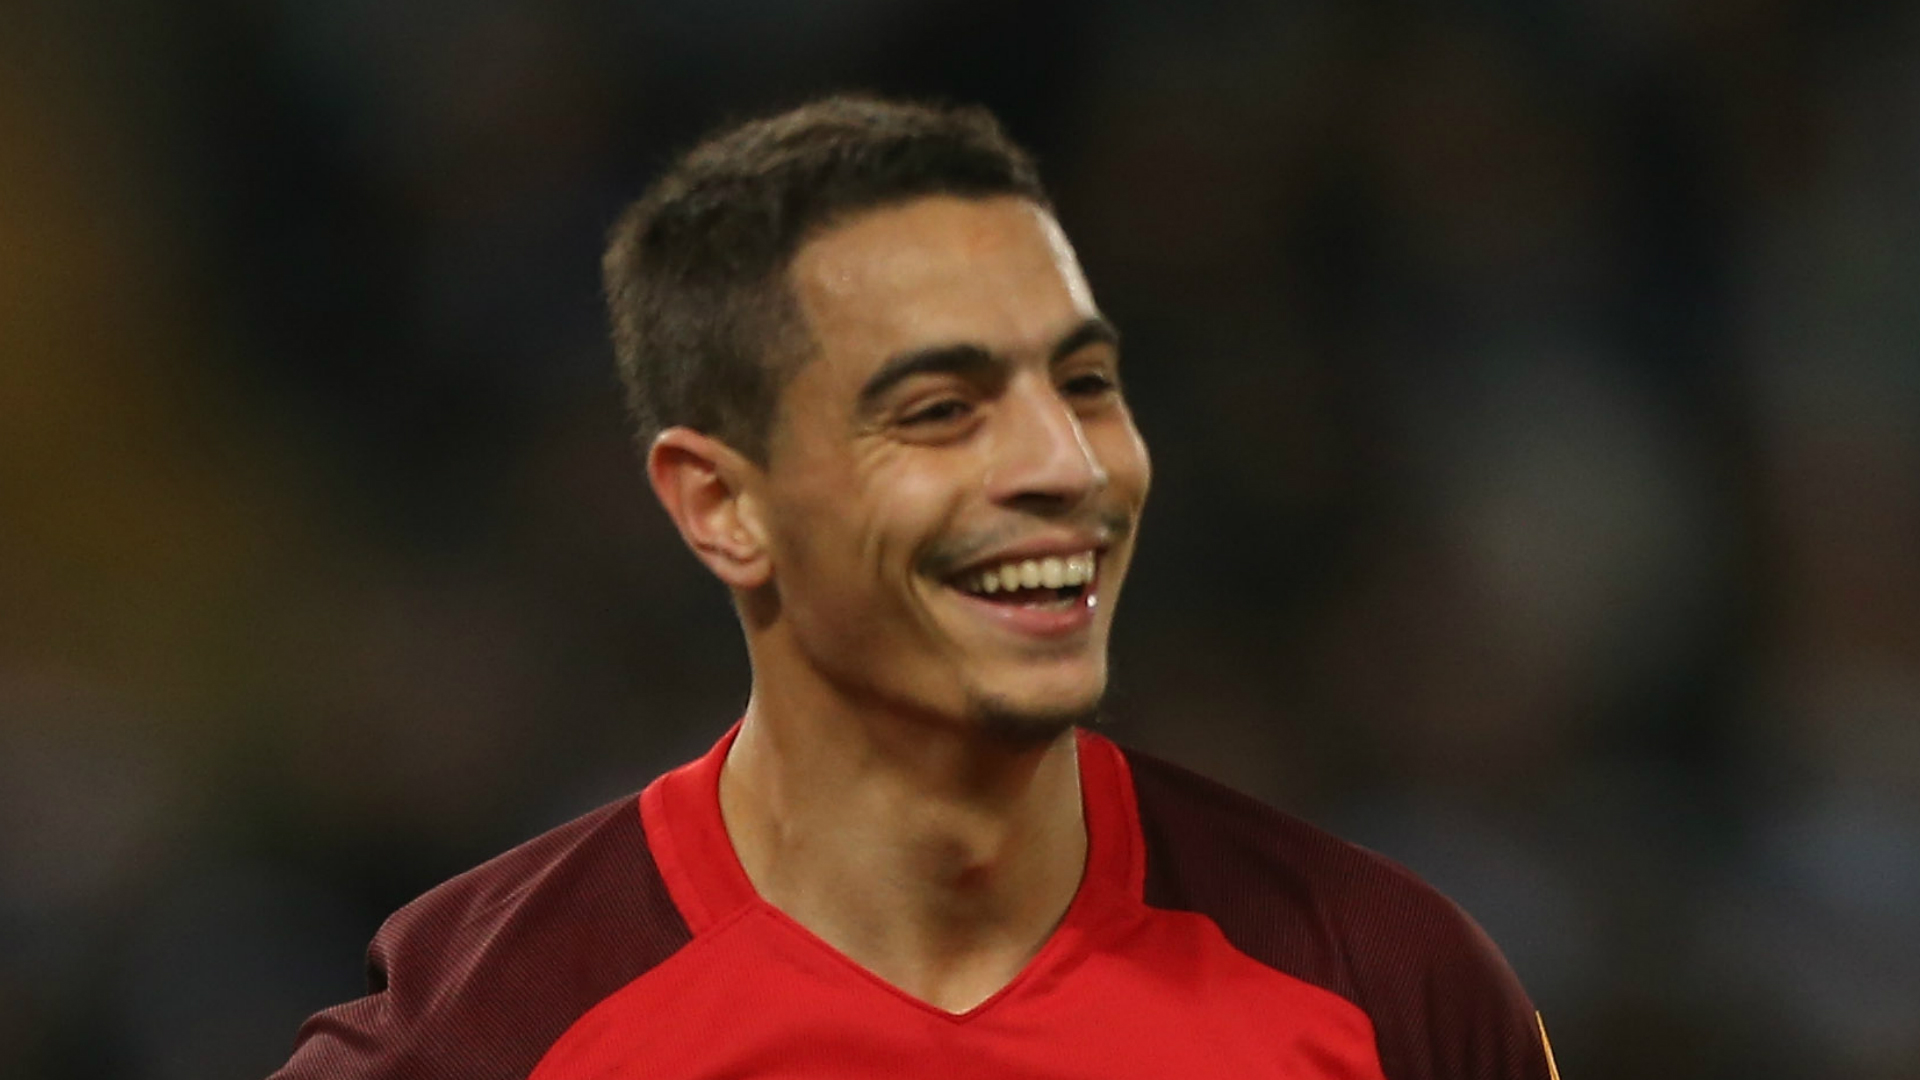 Forward Wissam Ben Yedder scored regularly in LaLiga for Sevilla and is determined to do the same in Ligue 1 to lift Monaco up the table.